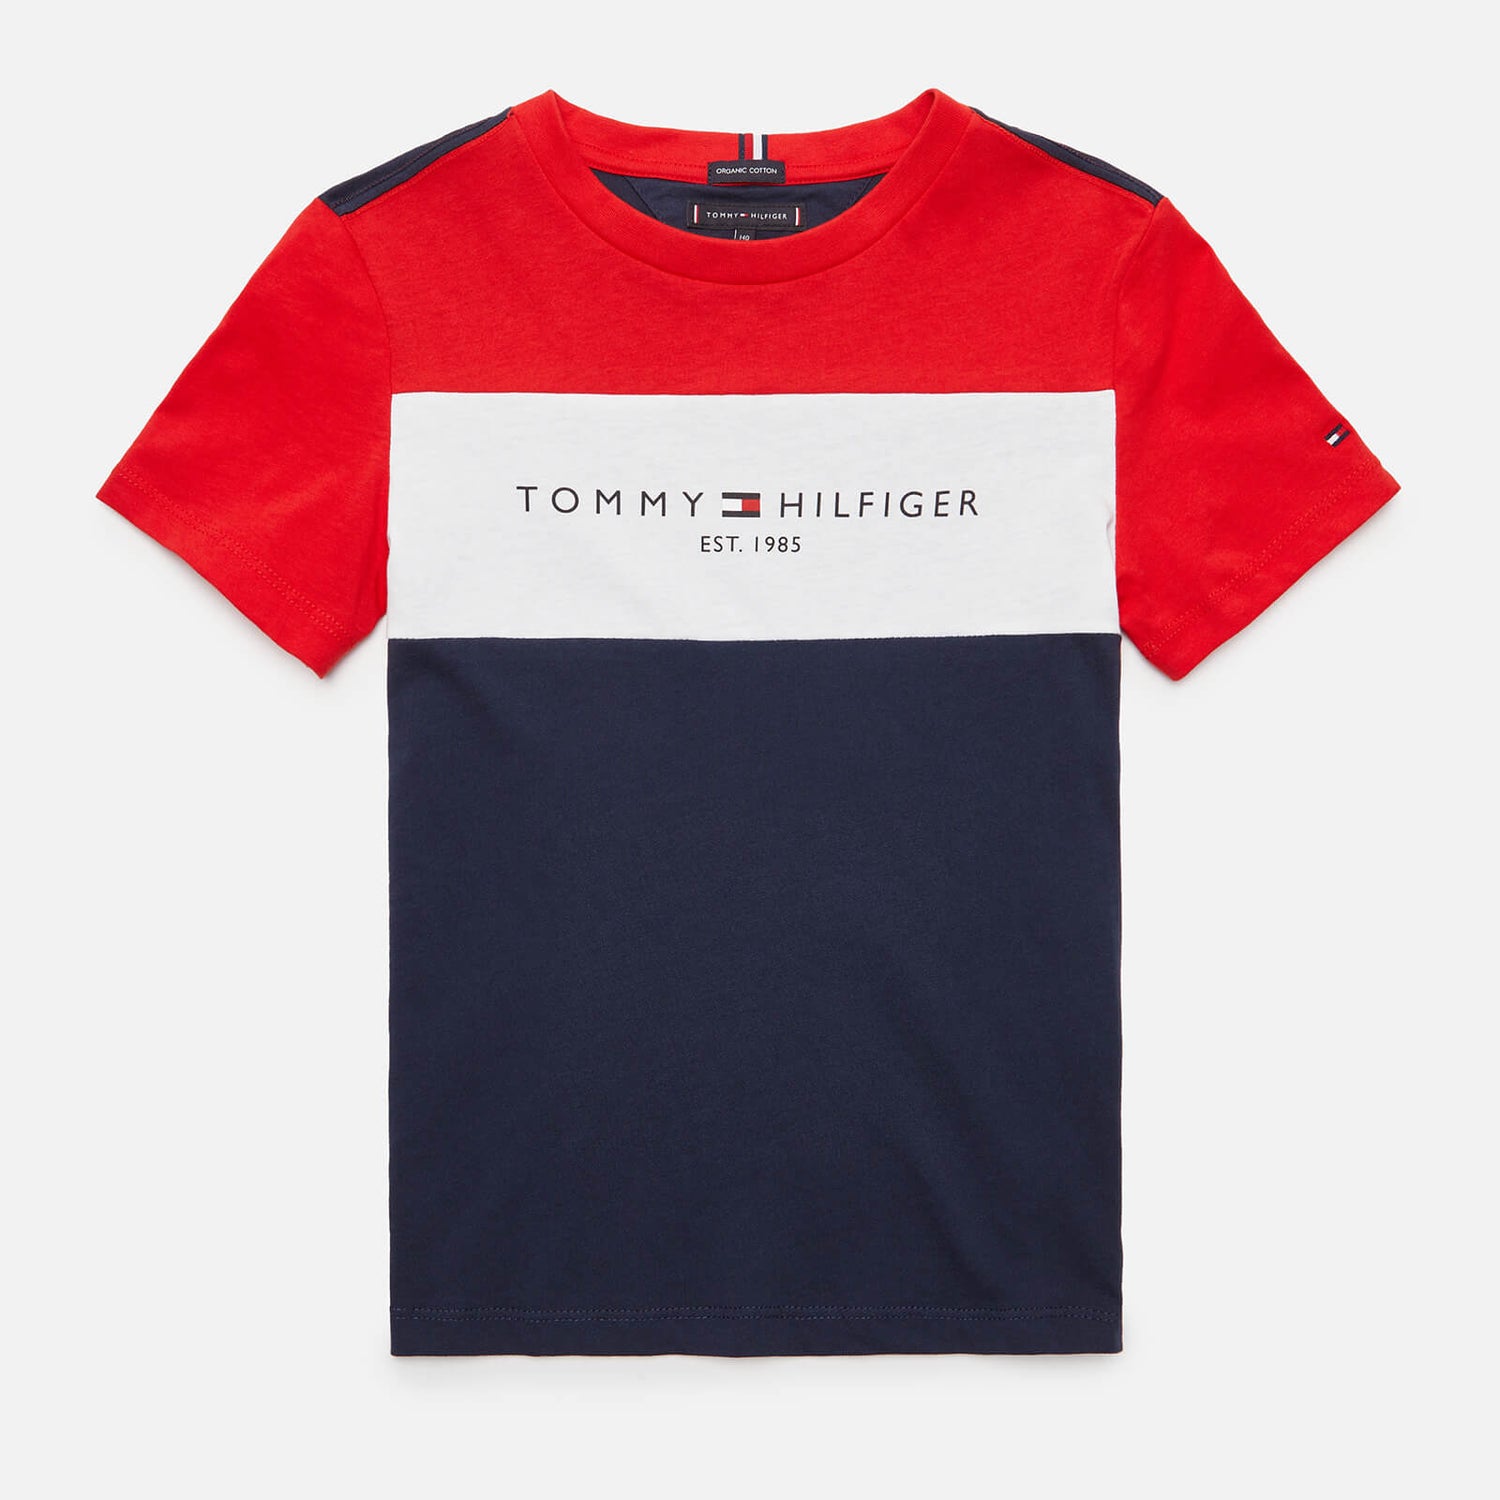 Tommy Hilfiger Boys' Essential Colorblock T-Shirt - Navy